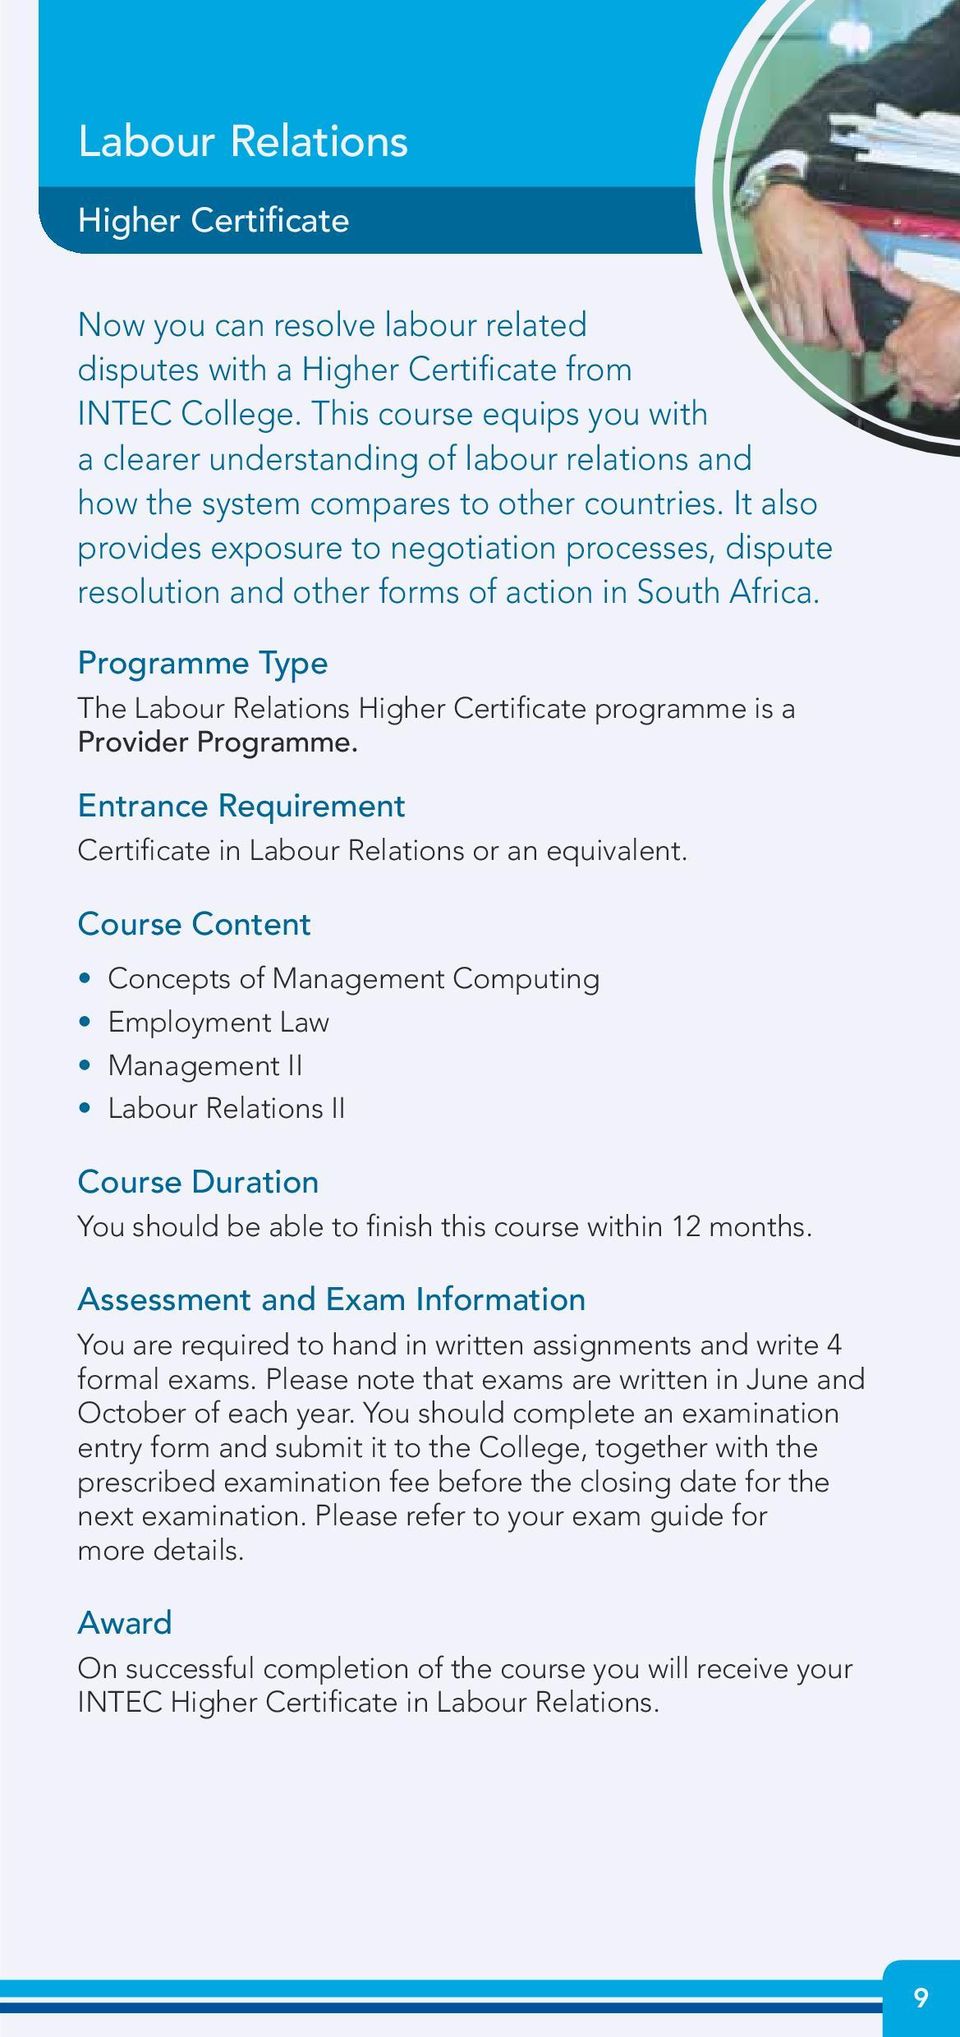 It also provides exposure to negotiation processes, dispute resolution and other forms of action in South Africa. The Labour Relations Higher Certificate programme is a Provider Programme.